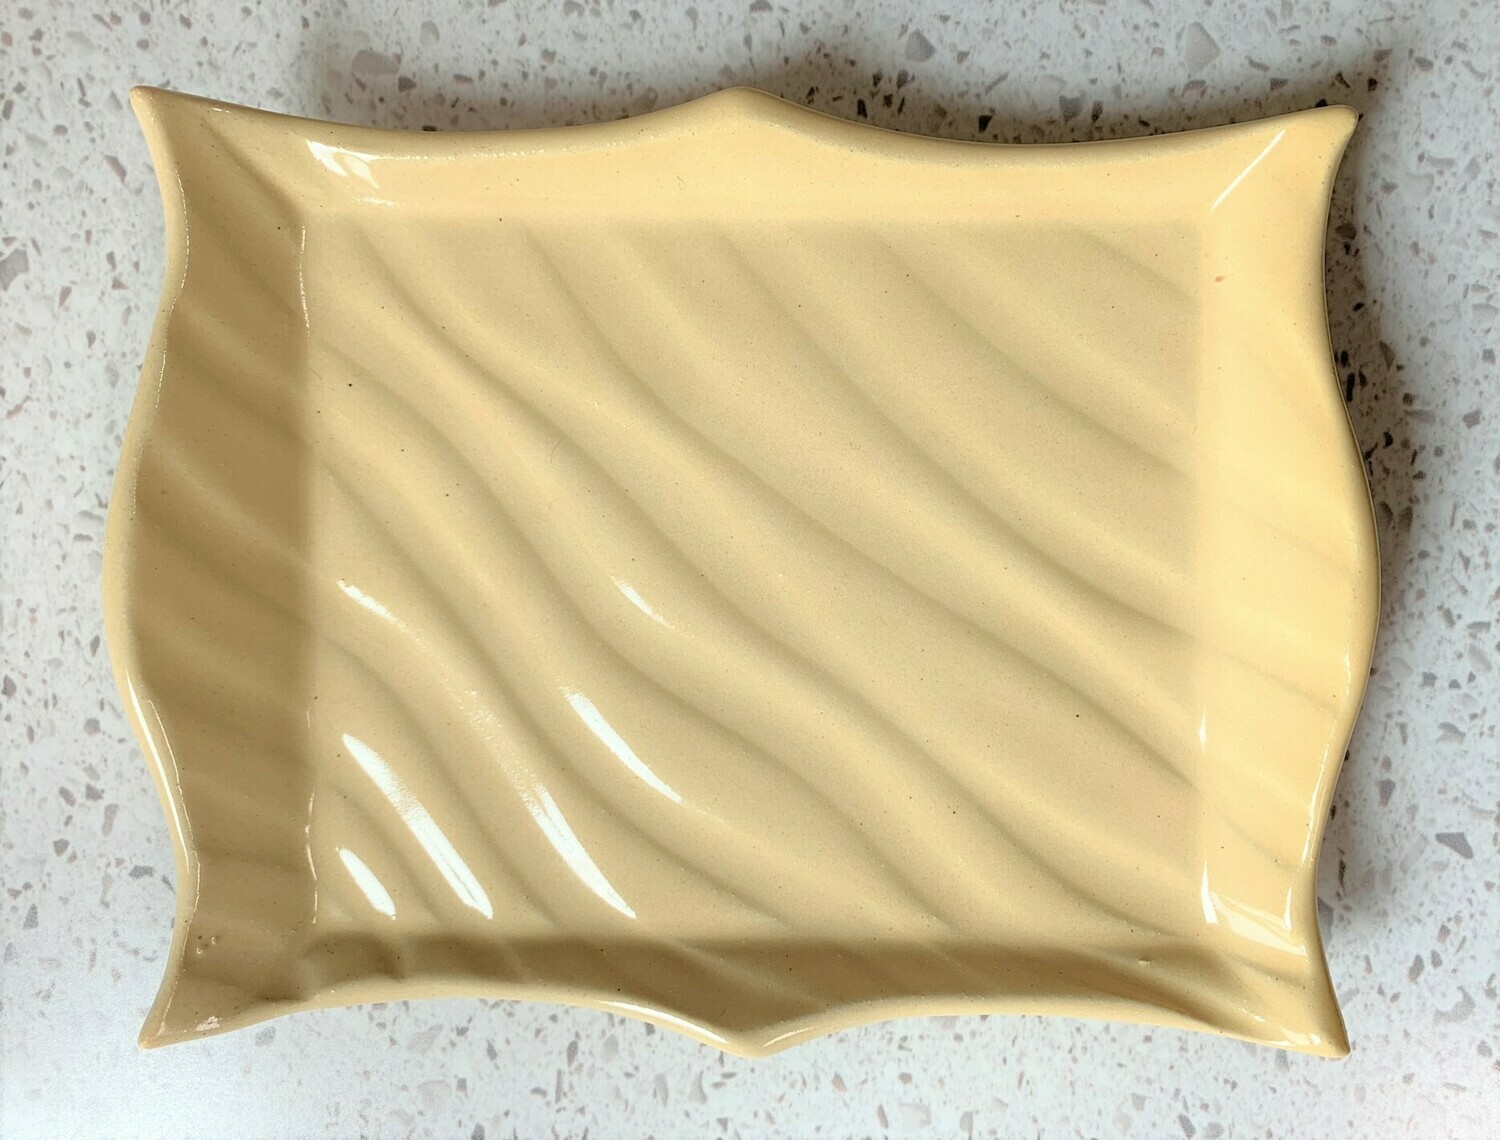 Wavy Soap Dish - Butter